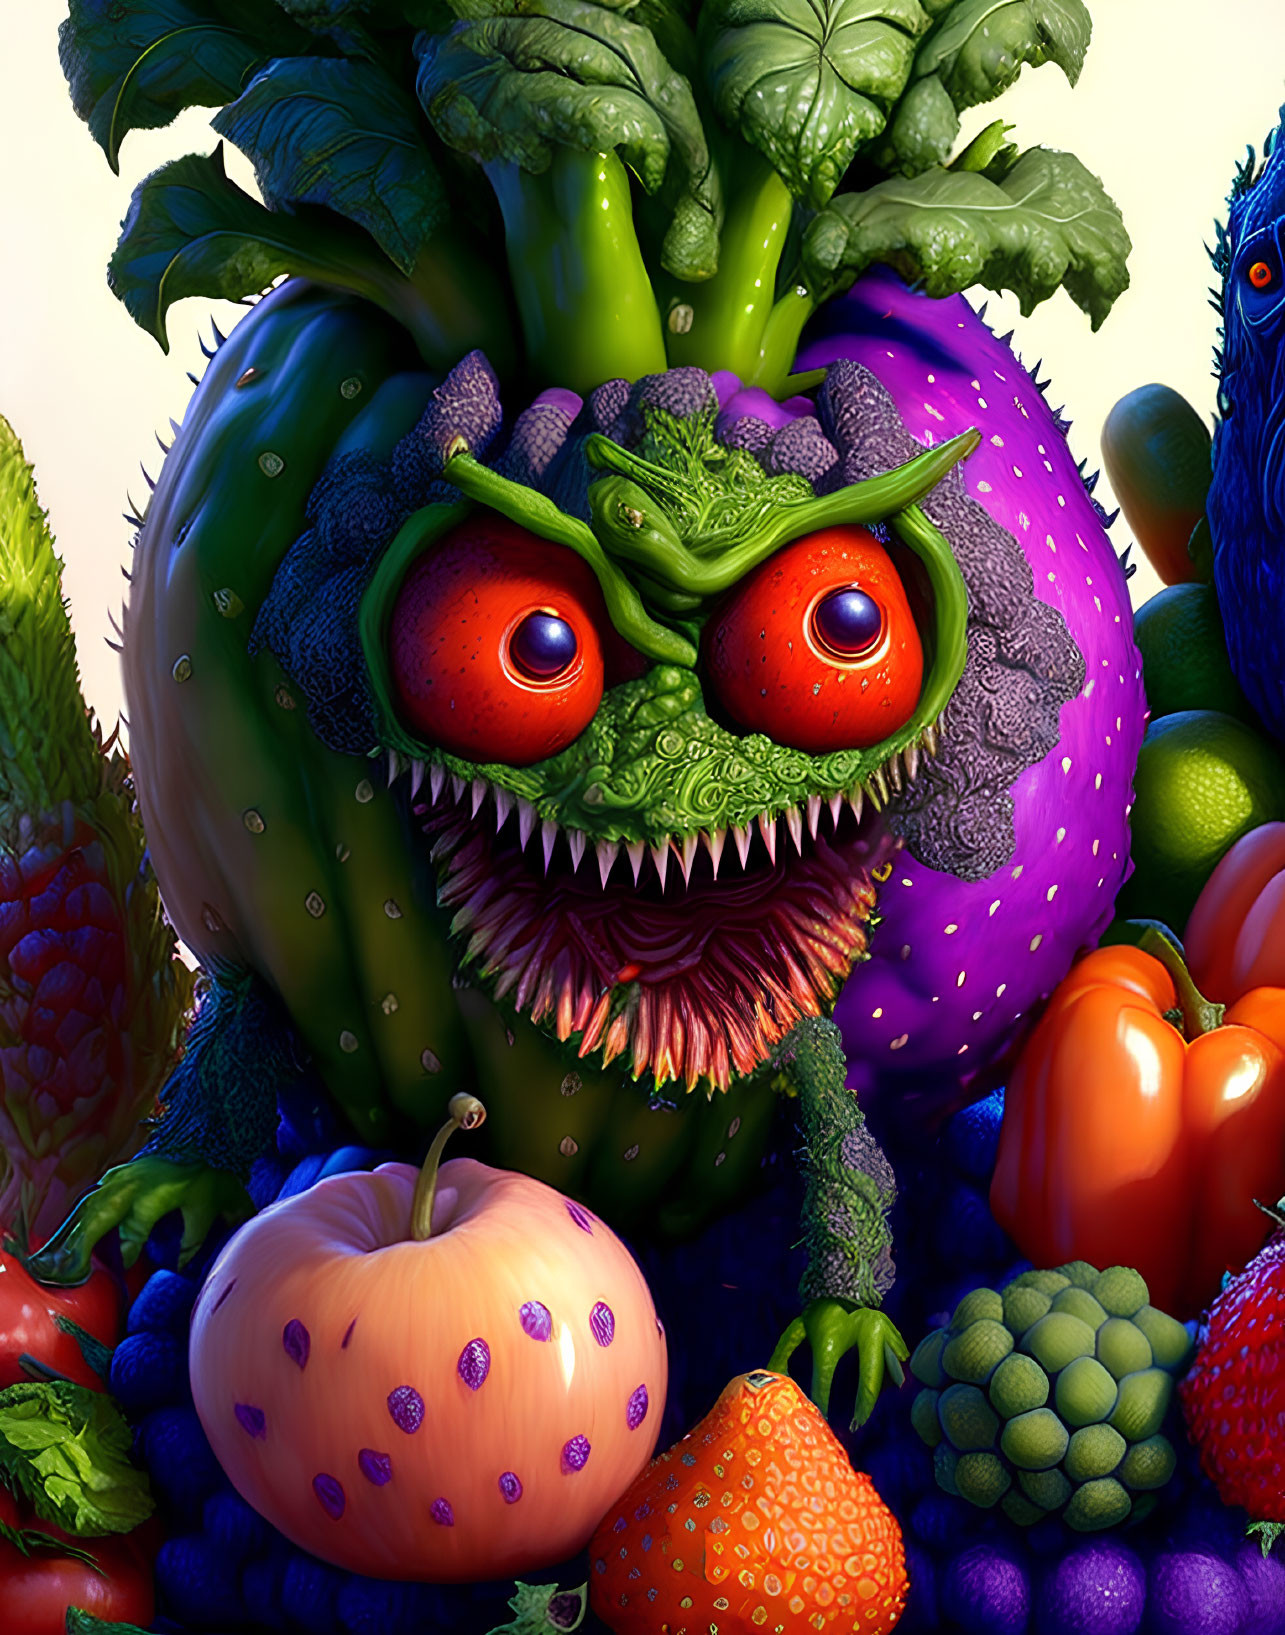 Anthropomorphic fruits and vegetables with expressive faces in a colorful illustration